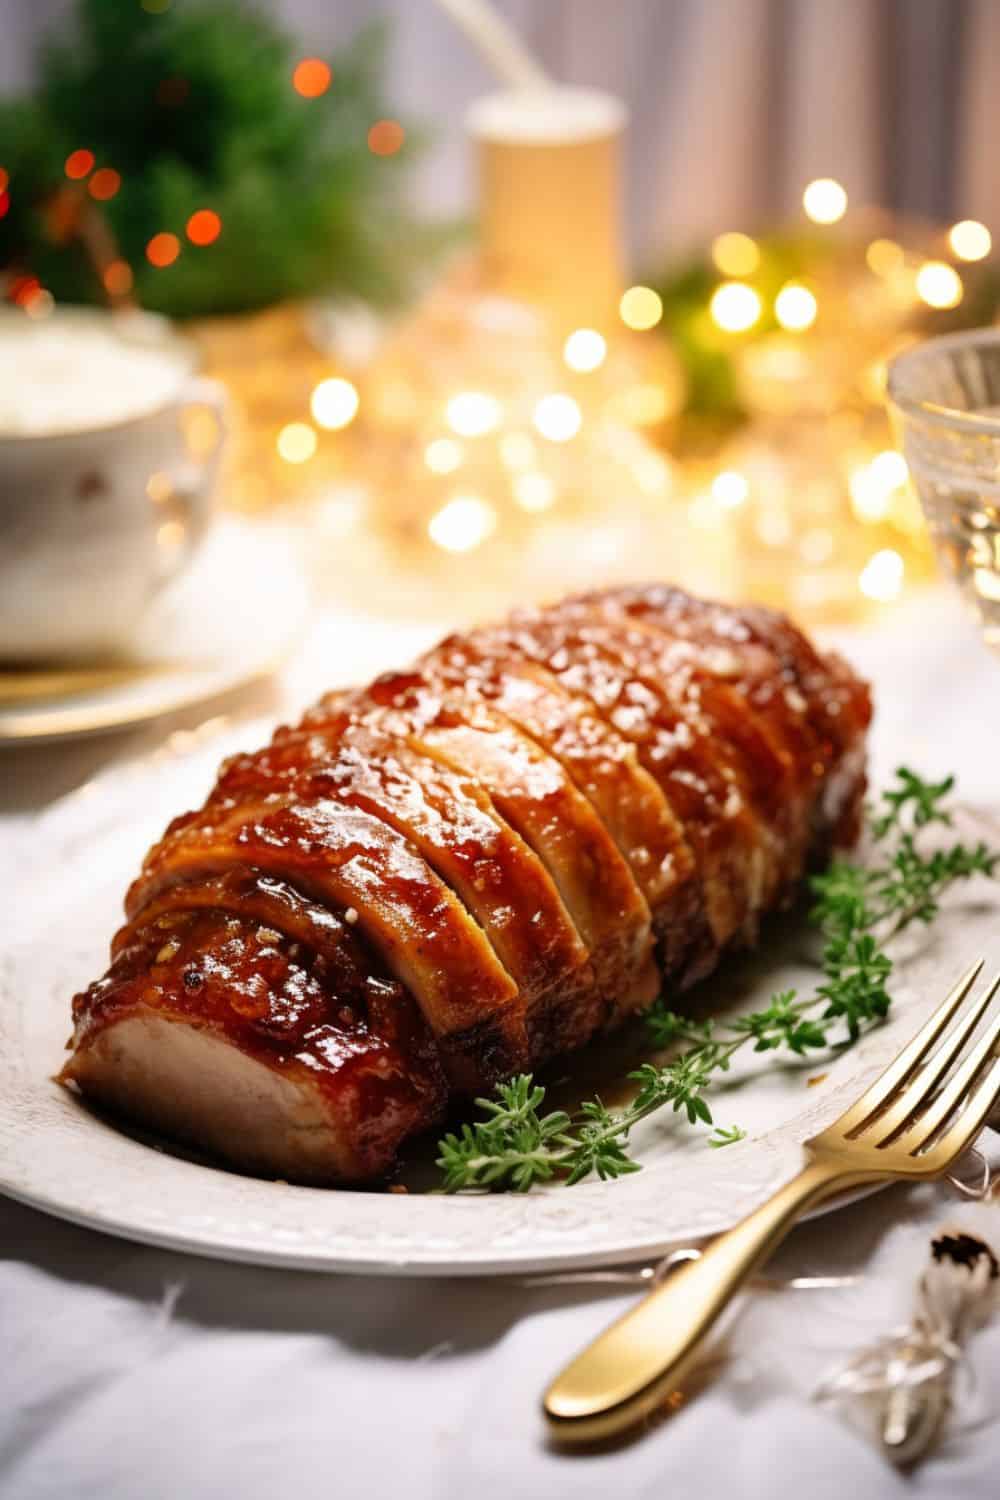 Sliced Brown Sugar Dijon Glazed Pork Loin arranged on a serving dish, displaying the tender, perfectly cooked interior and glazed exterior.